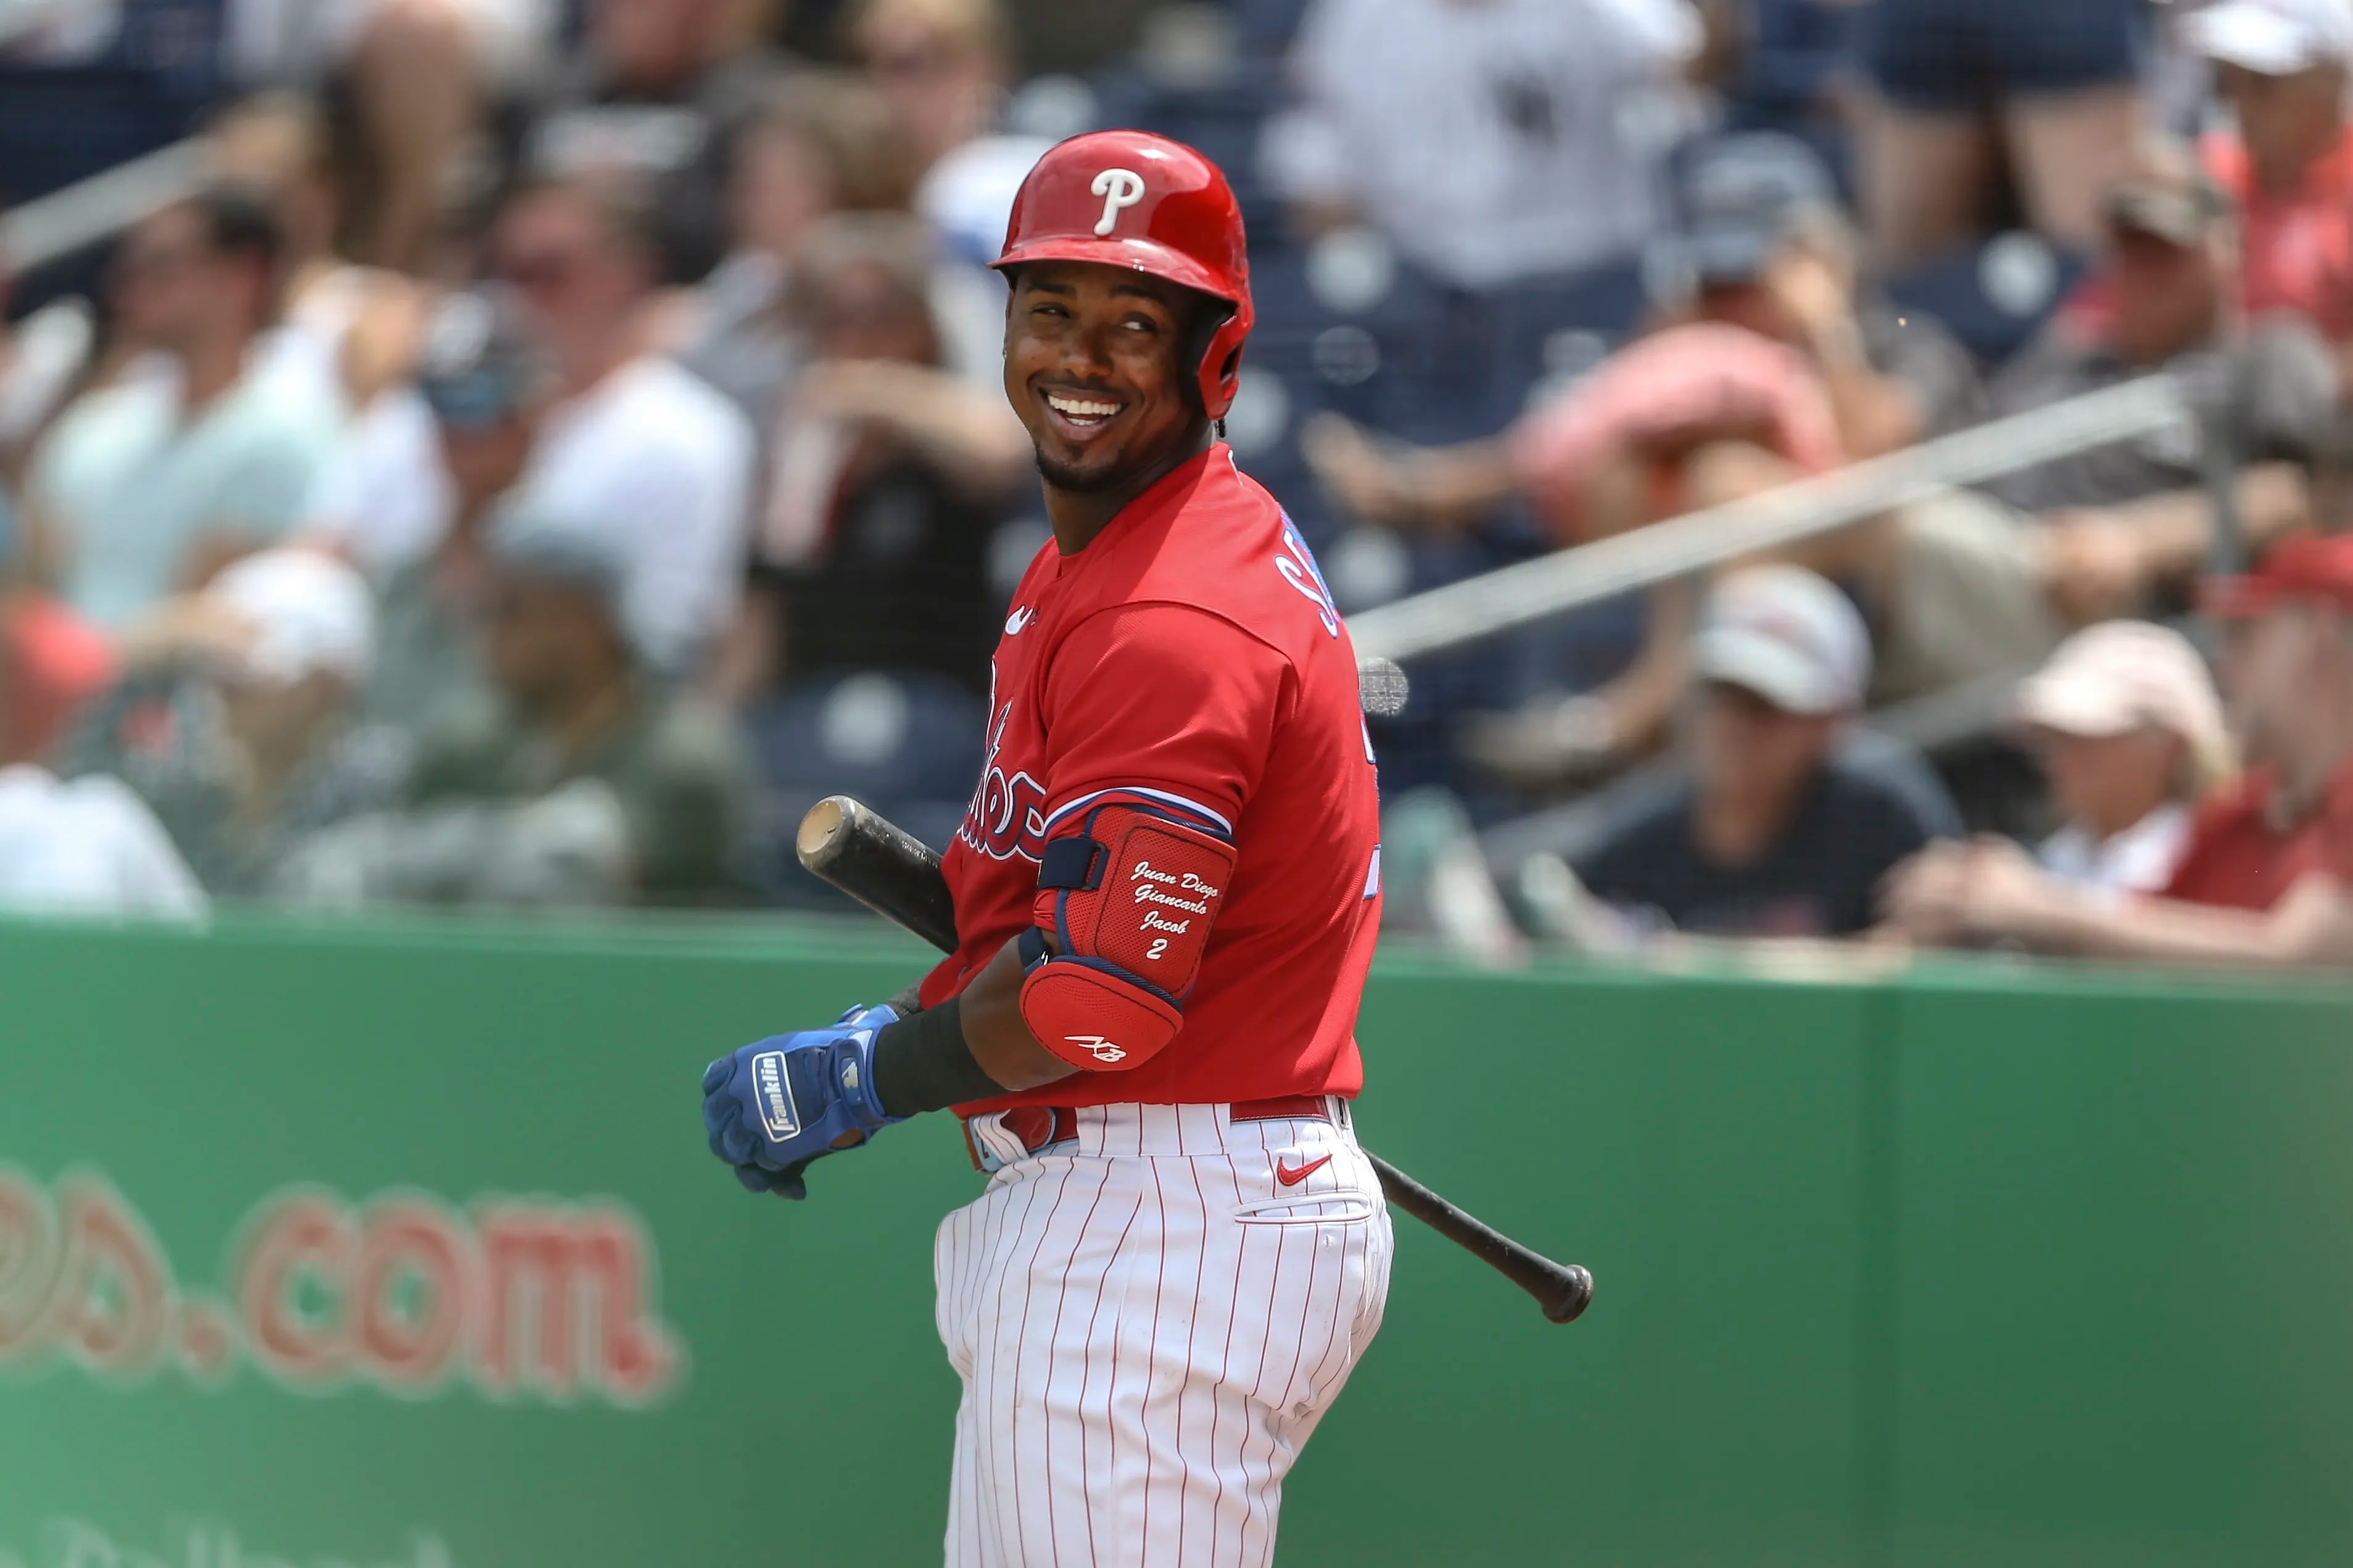 Phillies stay hot, sweep Yankees right out of Philadelphia – NBC